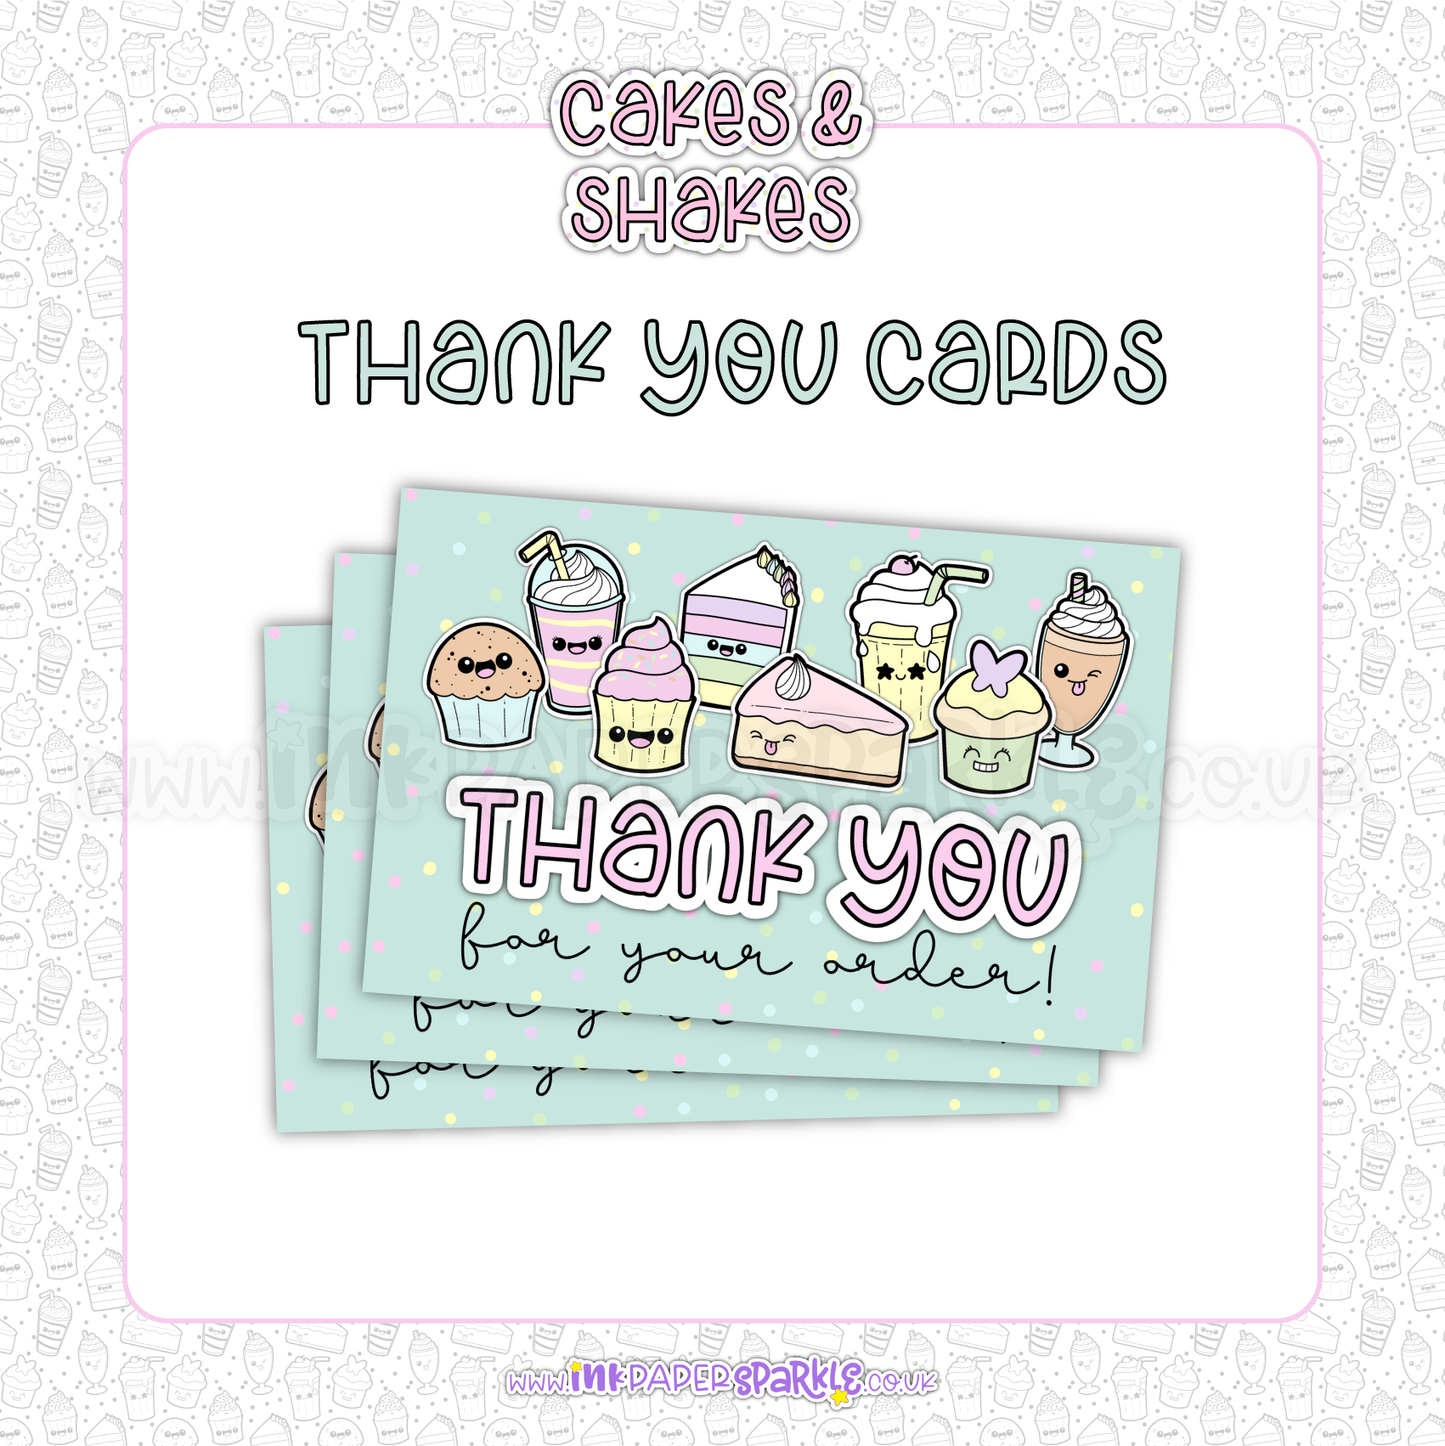 Cakes & Shakes Thank You Cards